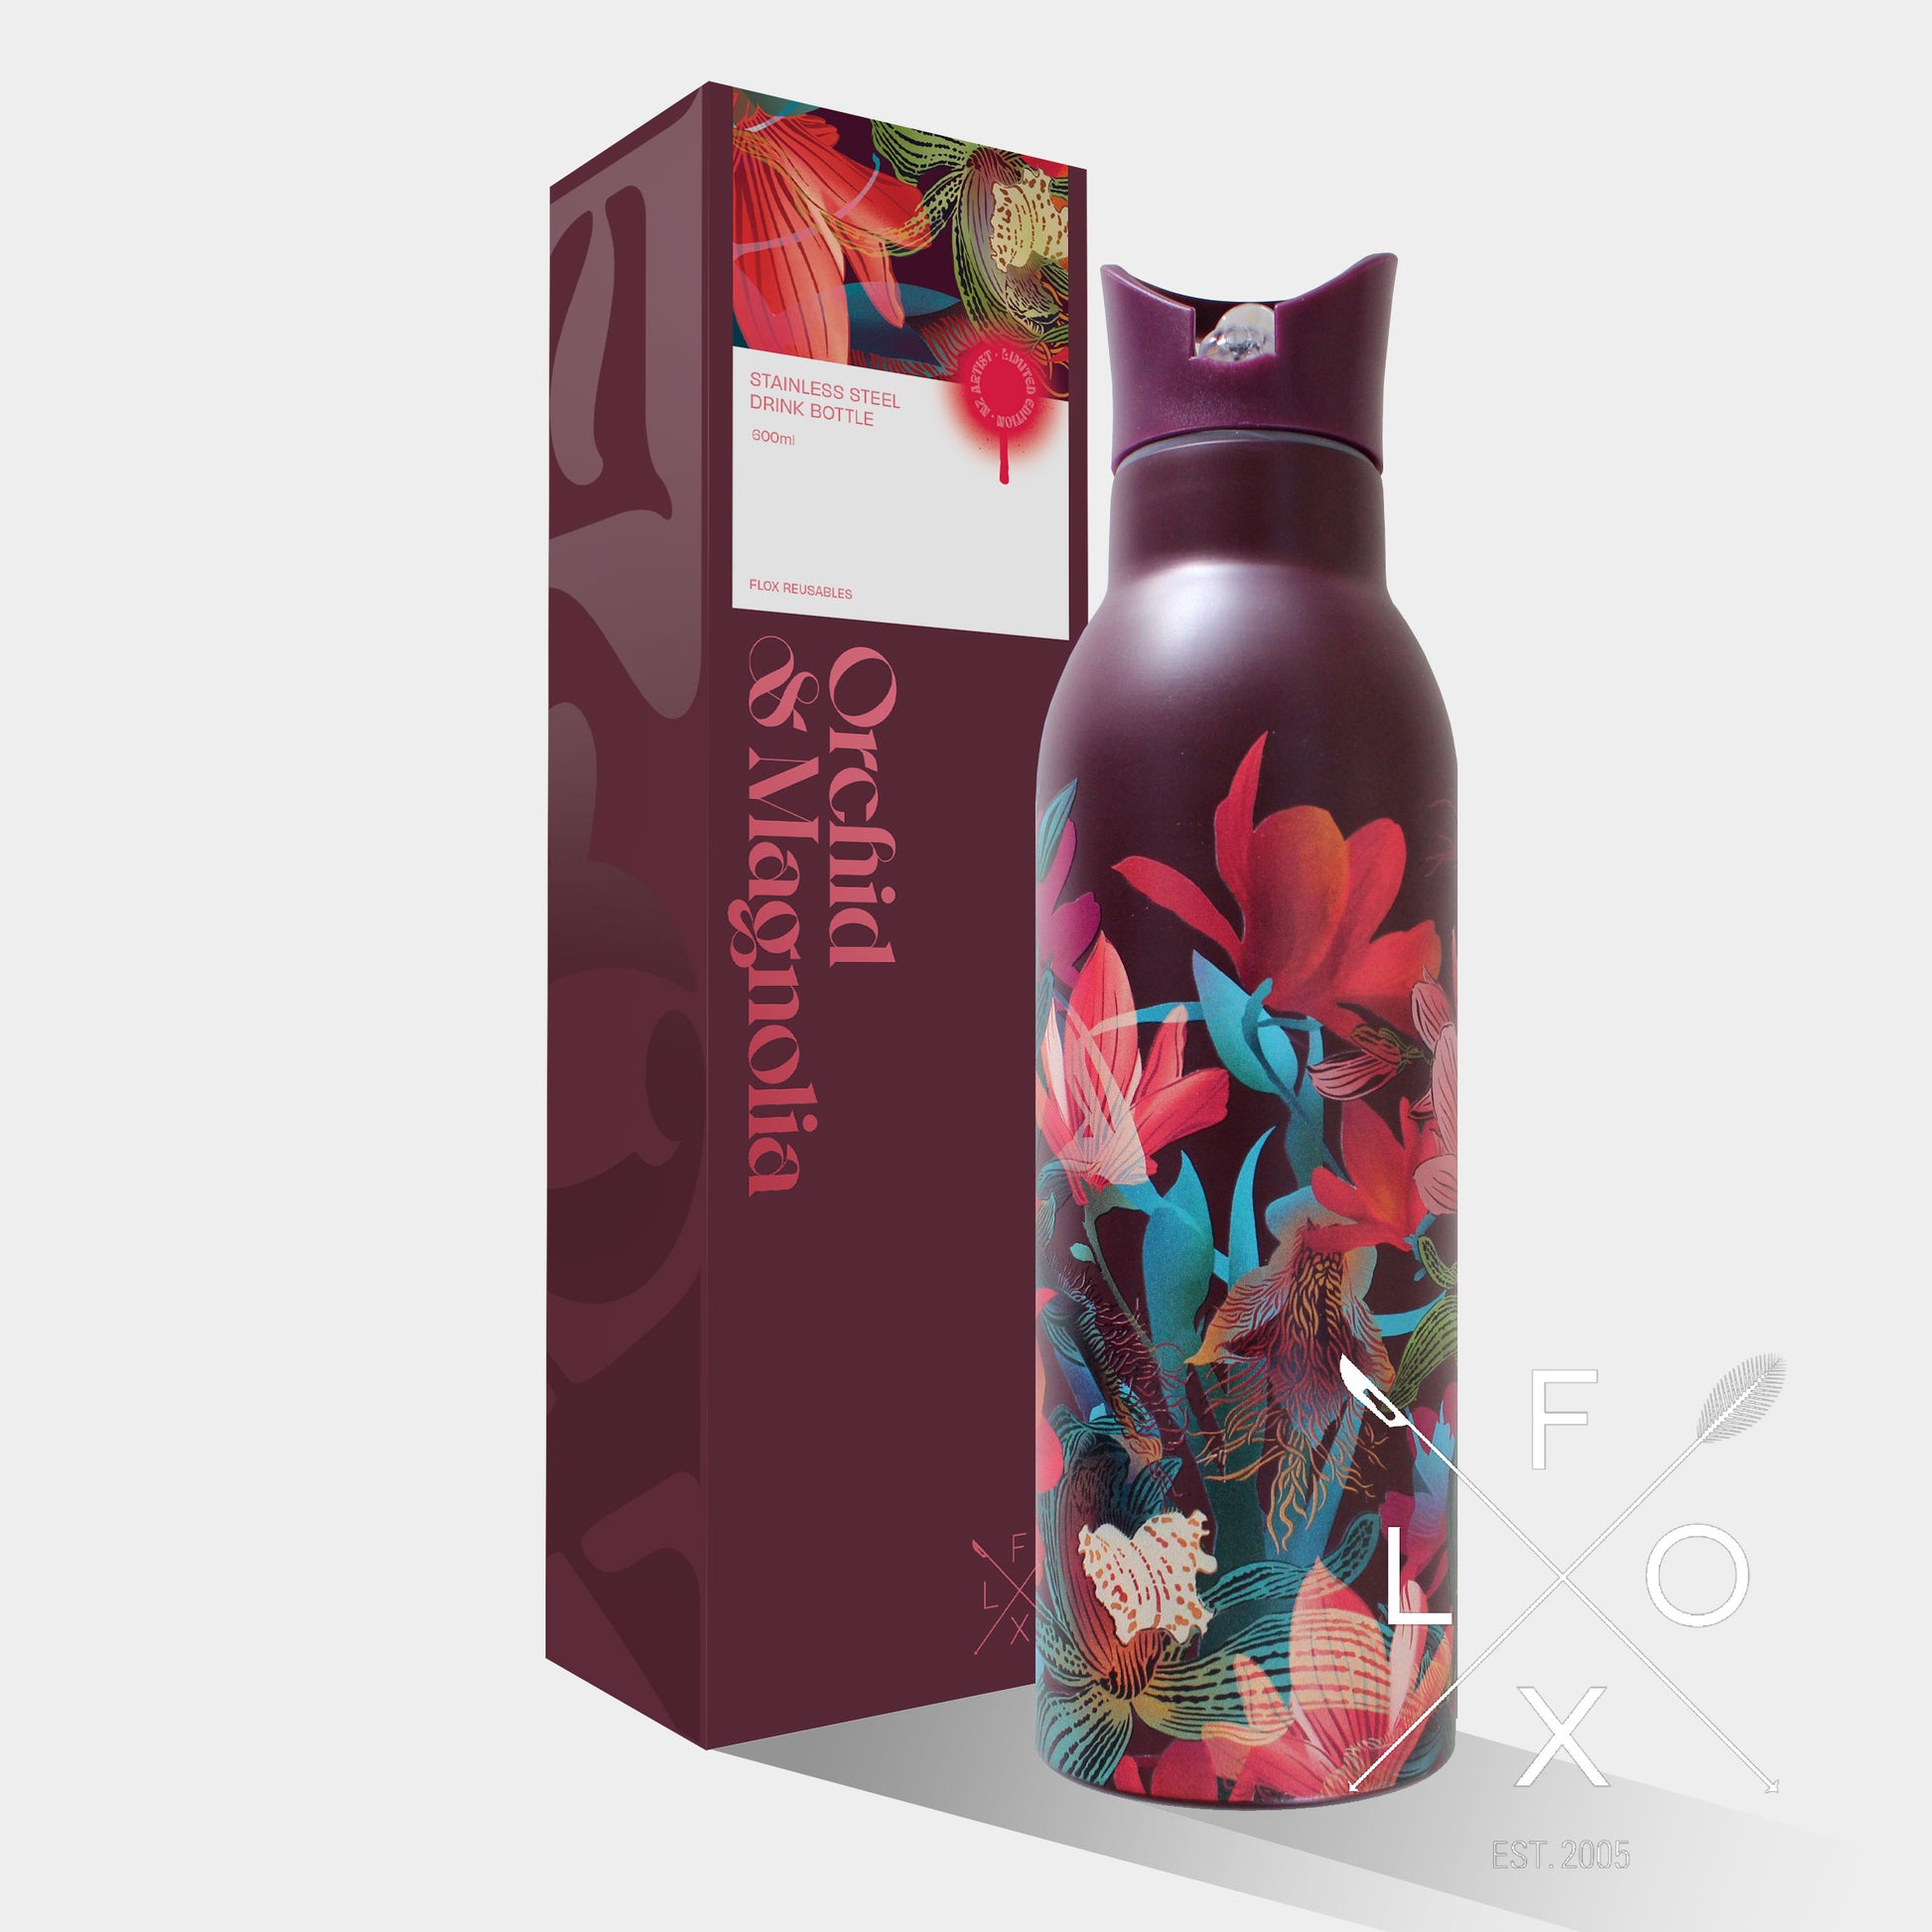 Burgundy drink bottle with magnolia and orchid print with matching box by Flox design.